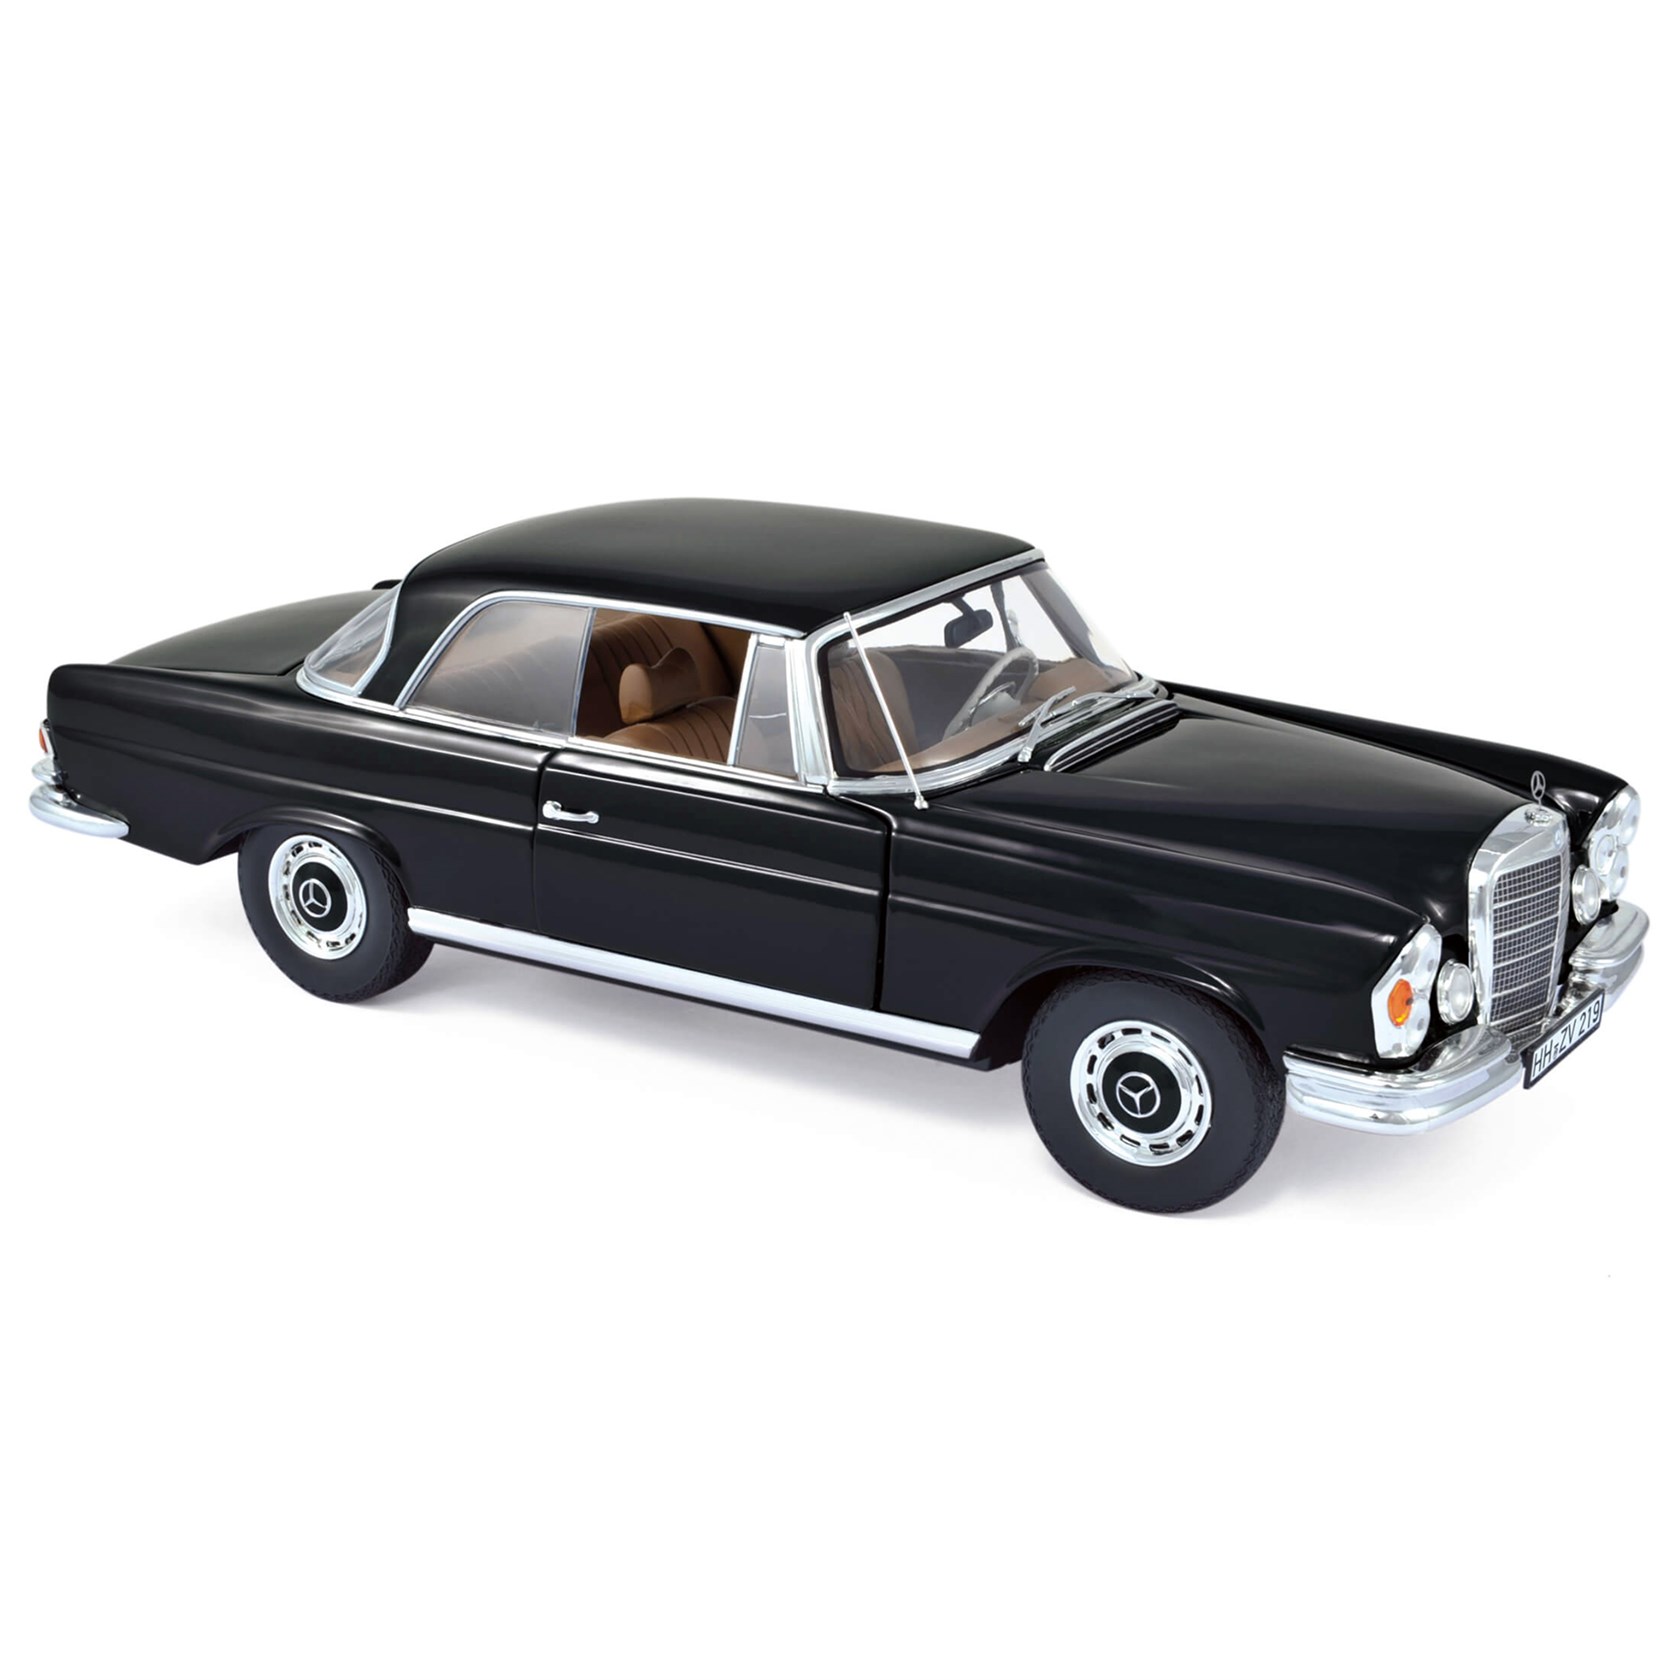 1968 Mercedes-Benz 280 SE Coupe Blue 1:18 Diecast Car Model Collection by Norev